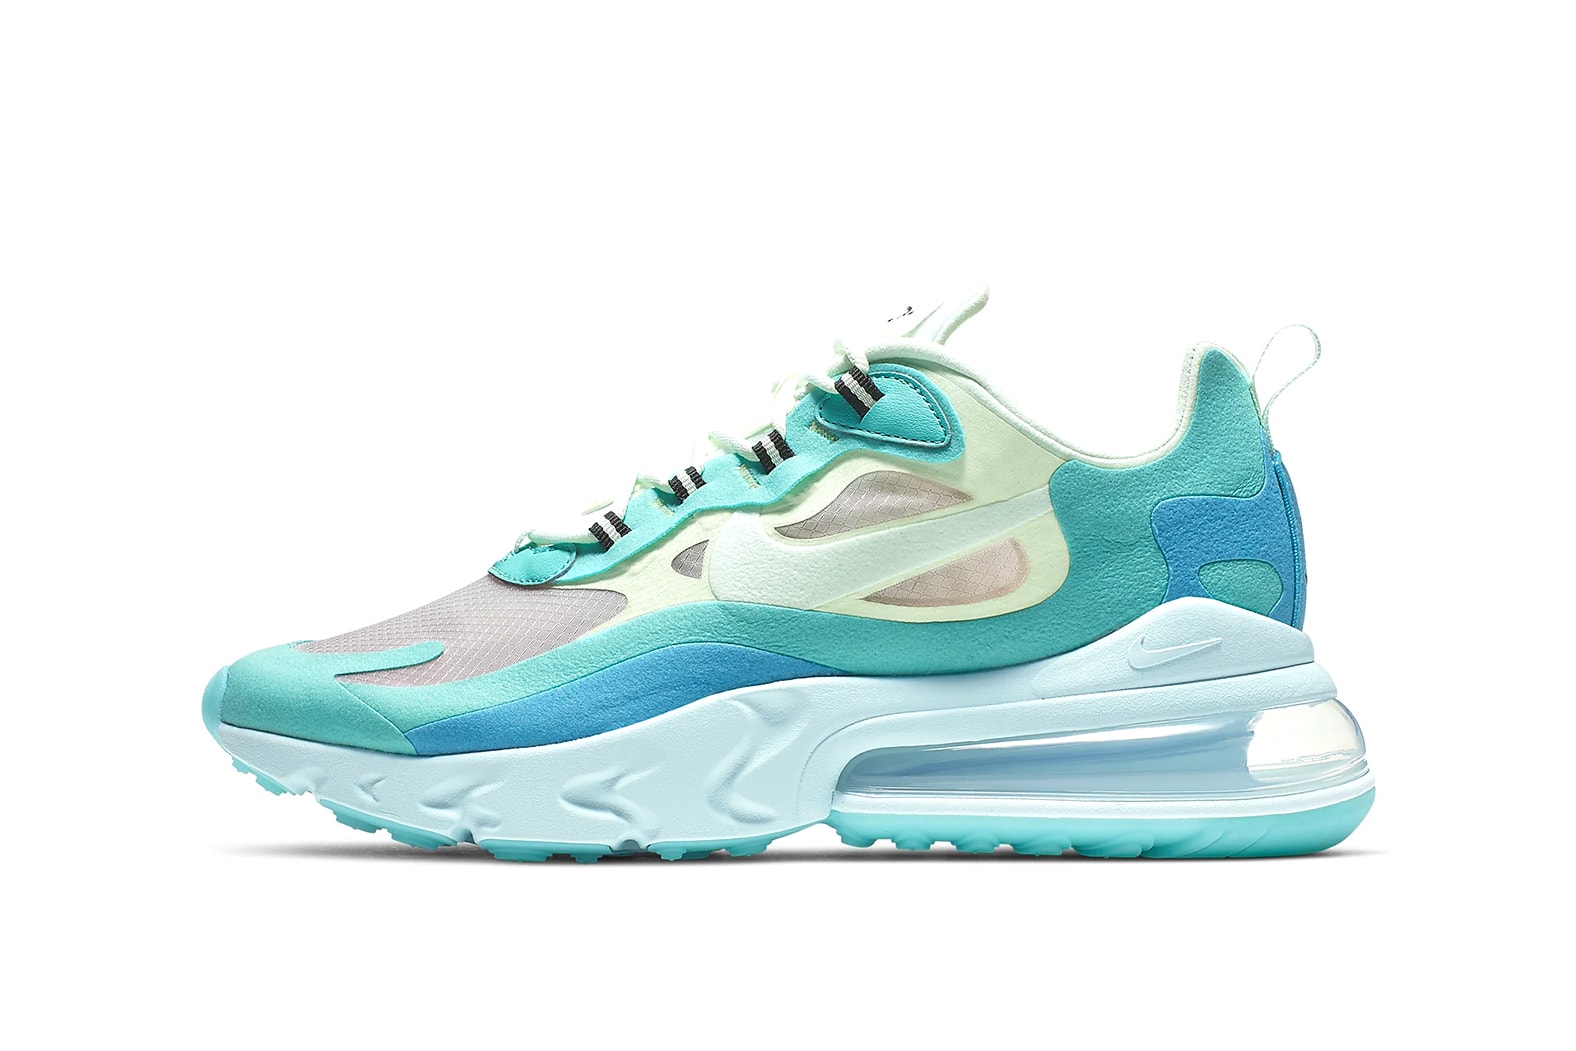 Nike's Hyper Jade Air Max 270 React & More Feature in This